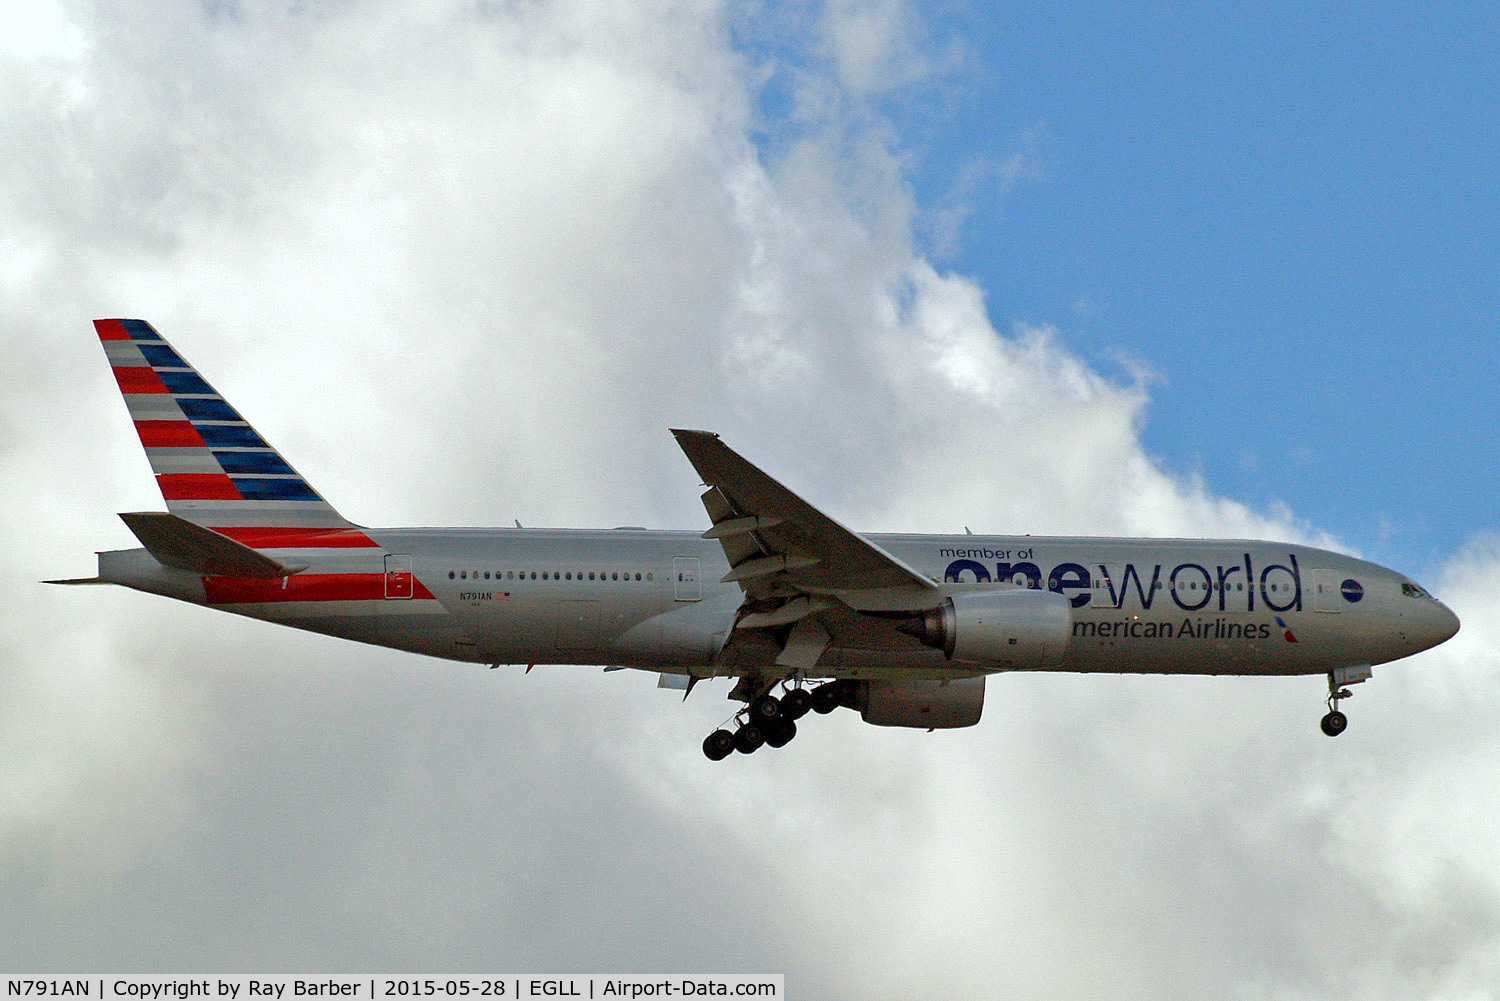 N791AN, 2000 Boeing 777-223/ER C/N 30254, Boeing 777-223ER [30254] (American Airlines) Home~G 28/05/2015. On approach 27L.